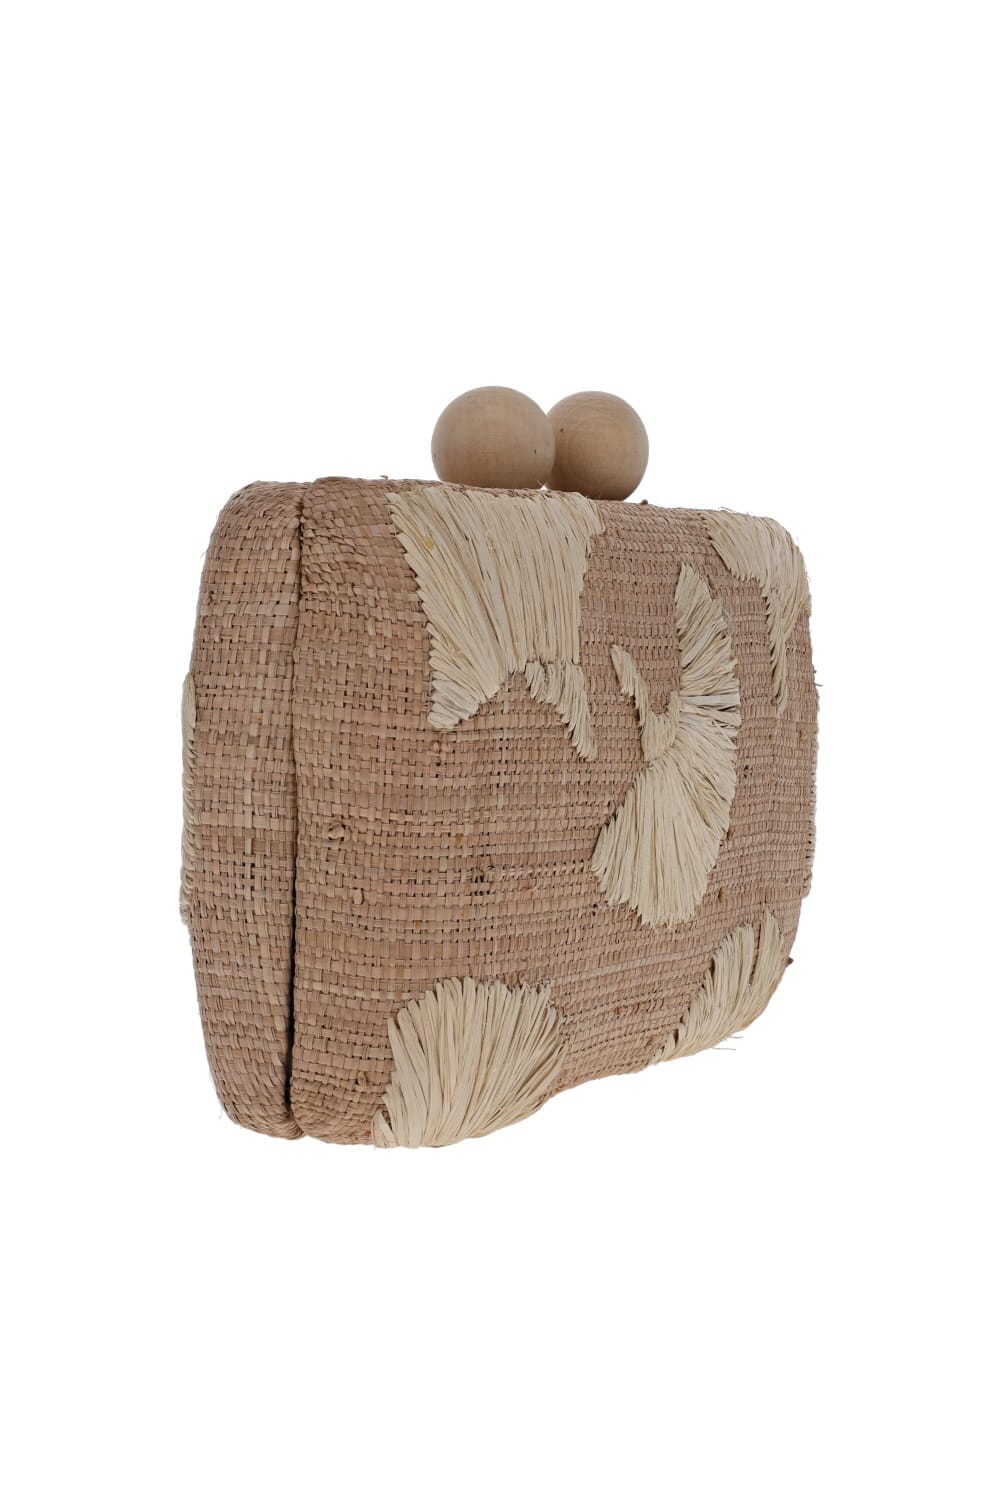 KAYU Ami Natural Embroidered Straw Clutch